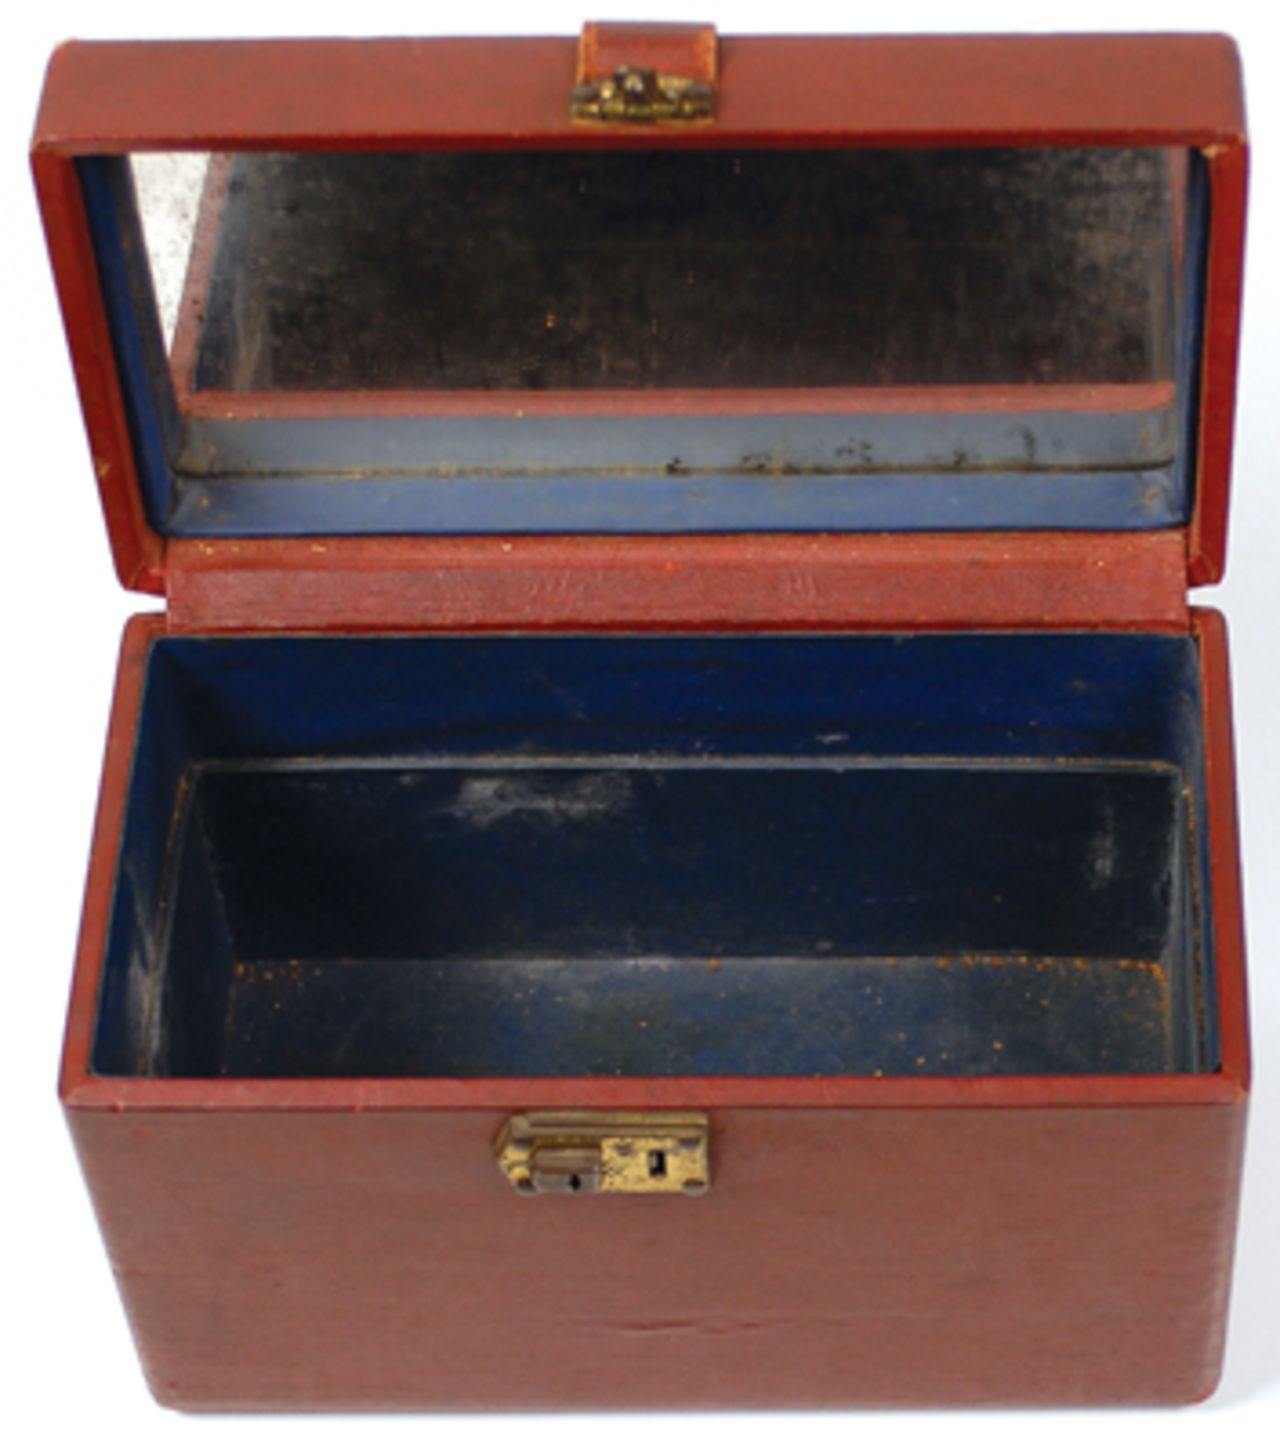 This cosmetic case, belonging to Bonnie Parker, was found in the car she and Clyde Barrow were in during the shootout with police that resulted in their deaths.